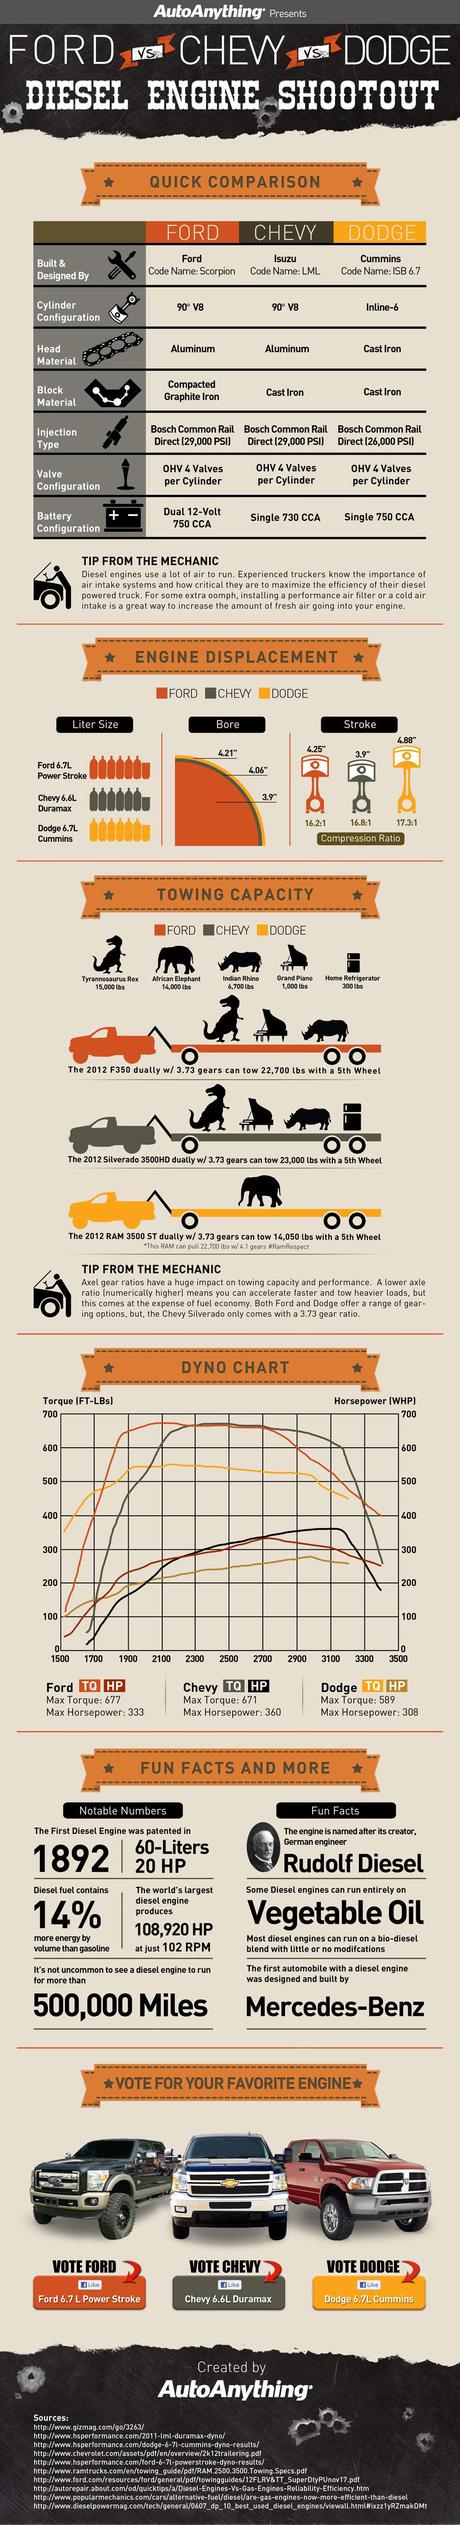 Infographic on Diesel Engines for Trucks